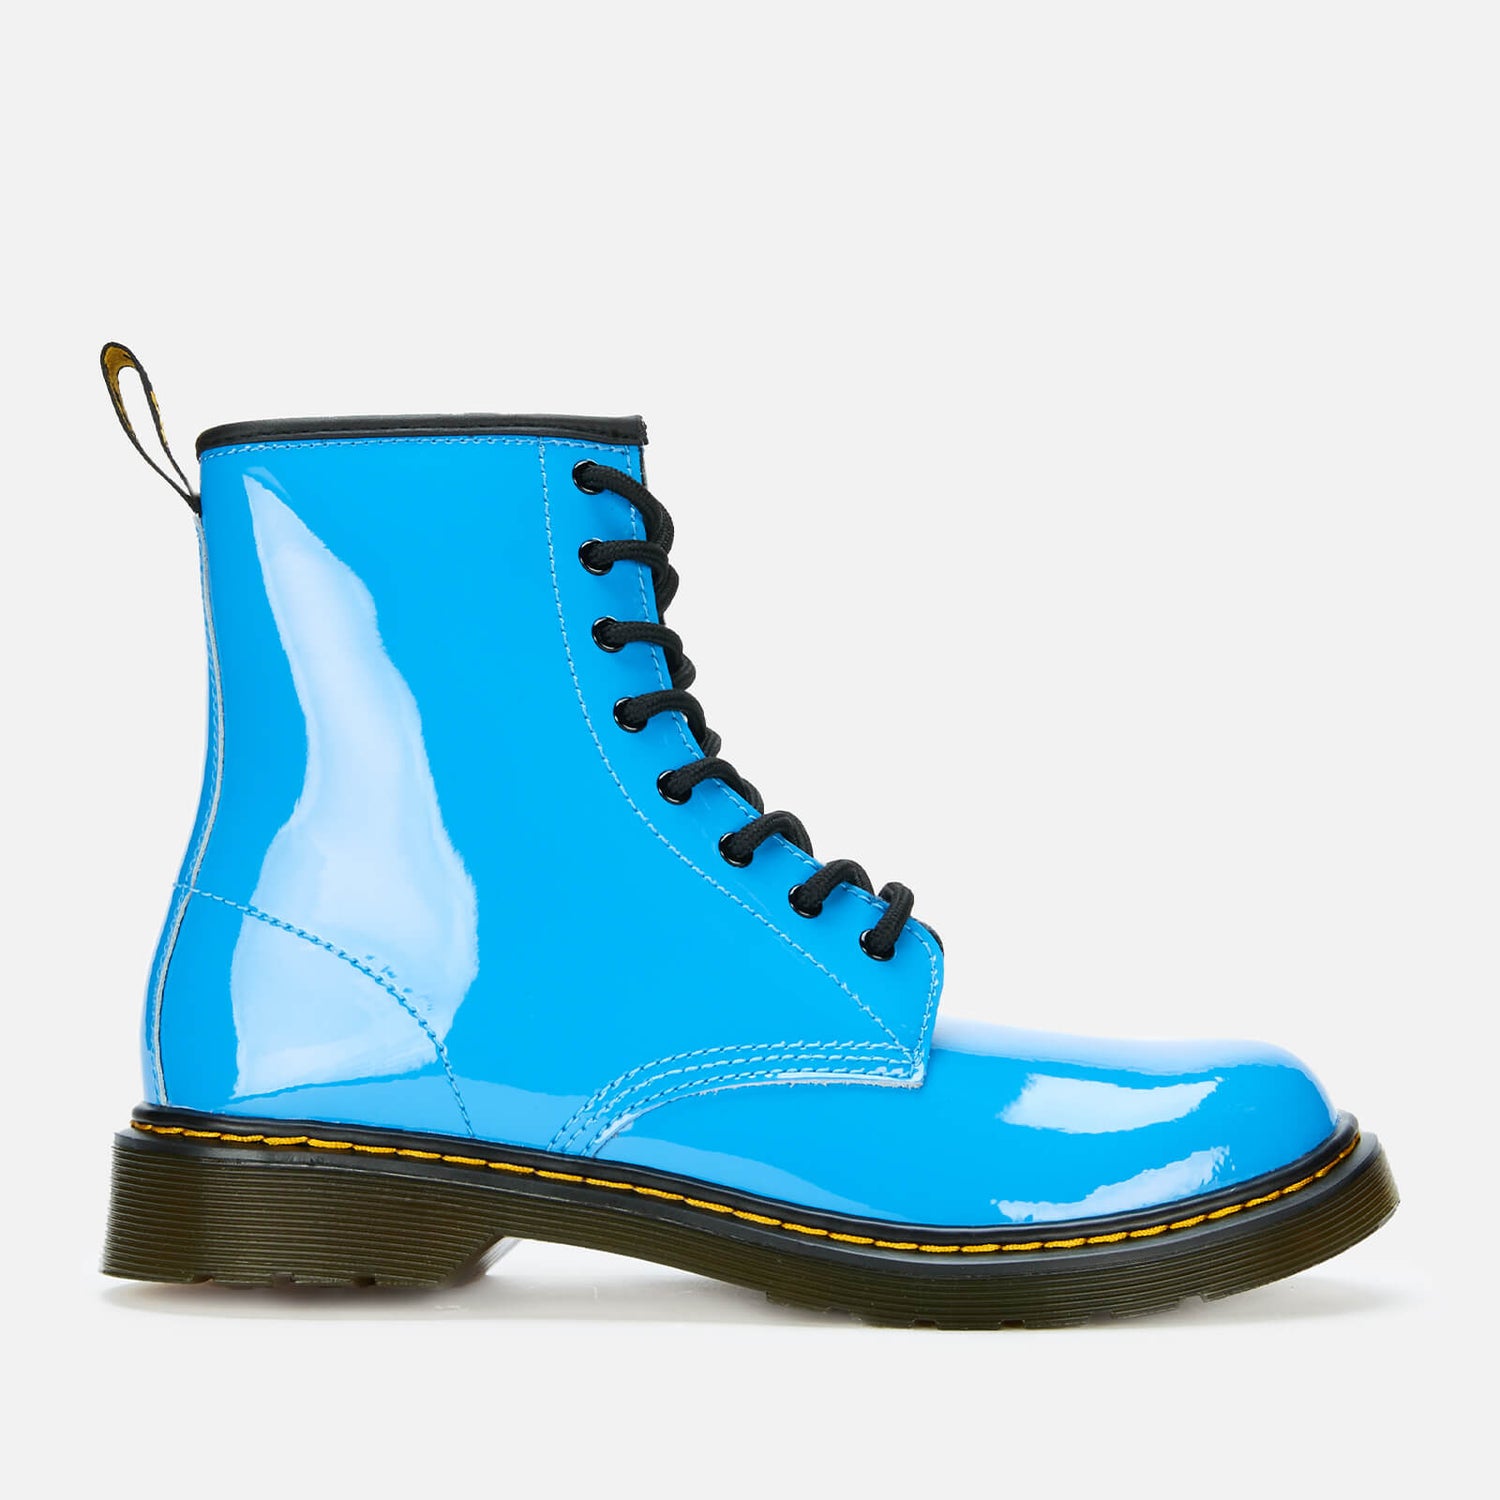 Dr. Martens Youth 1460 Patent Lamper Lace Up Boots - Mid Blue Patent Lamper